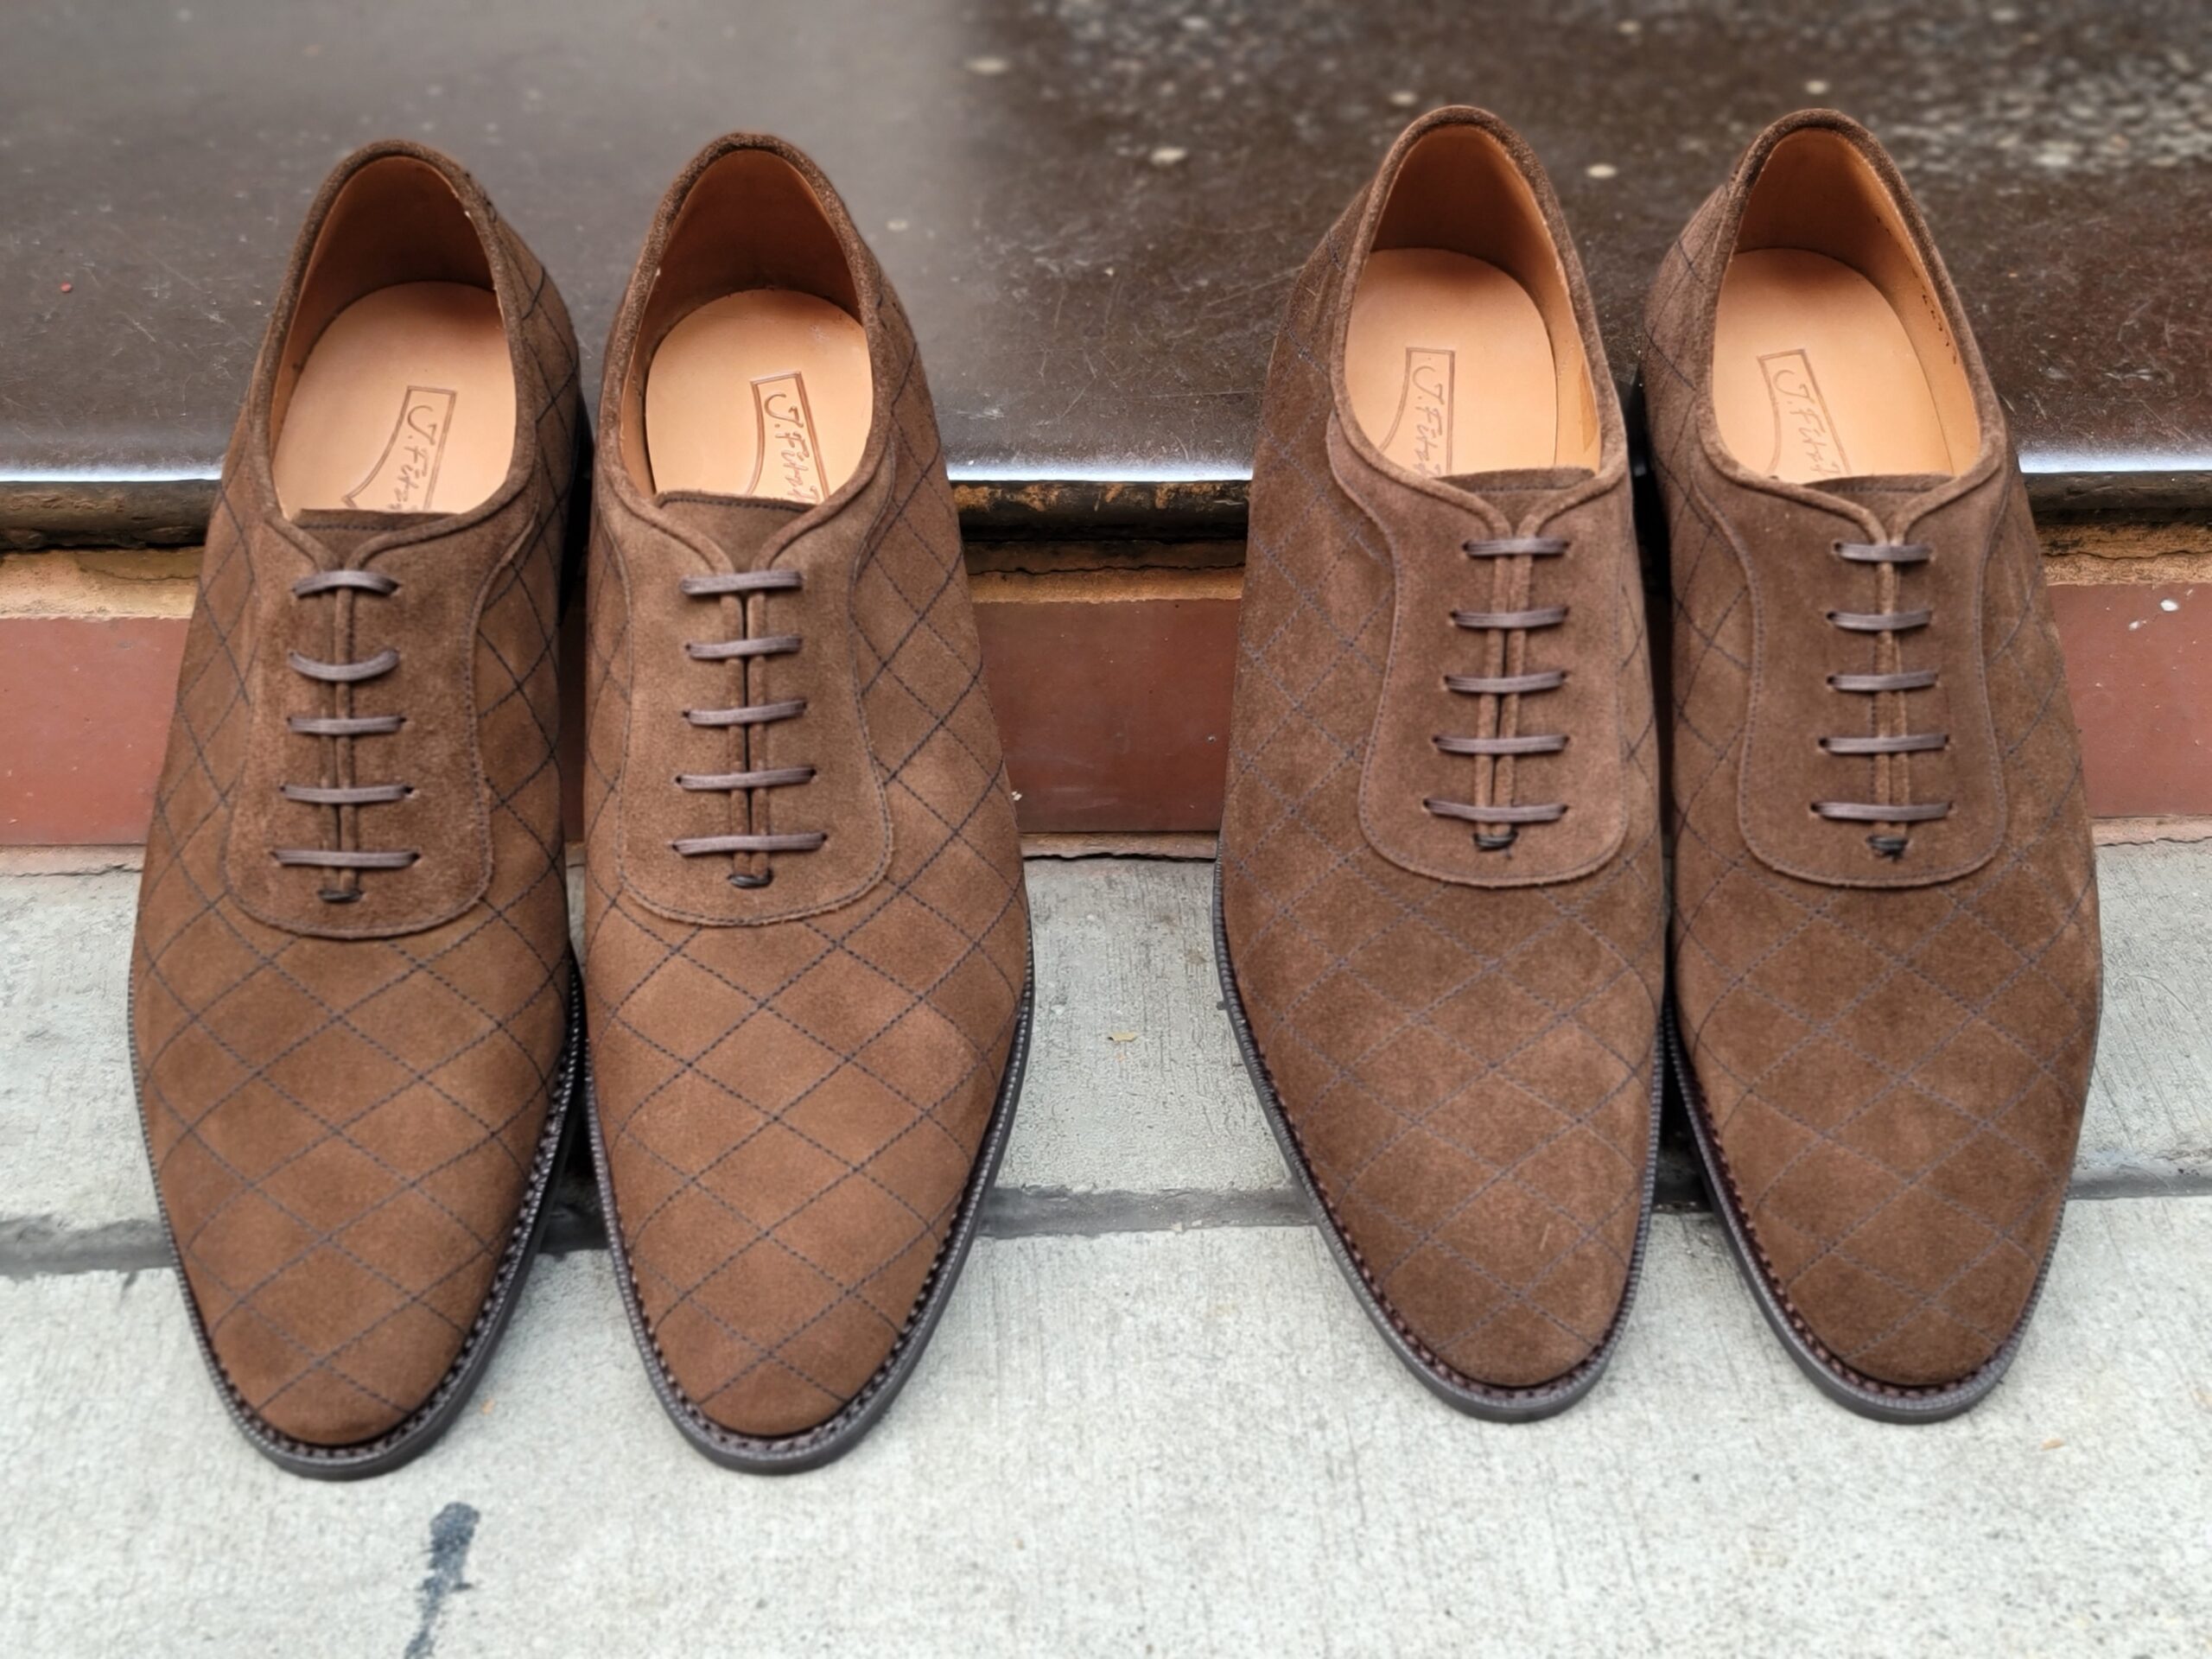 The Differences in Suede - The Shoe Snob